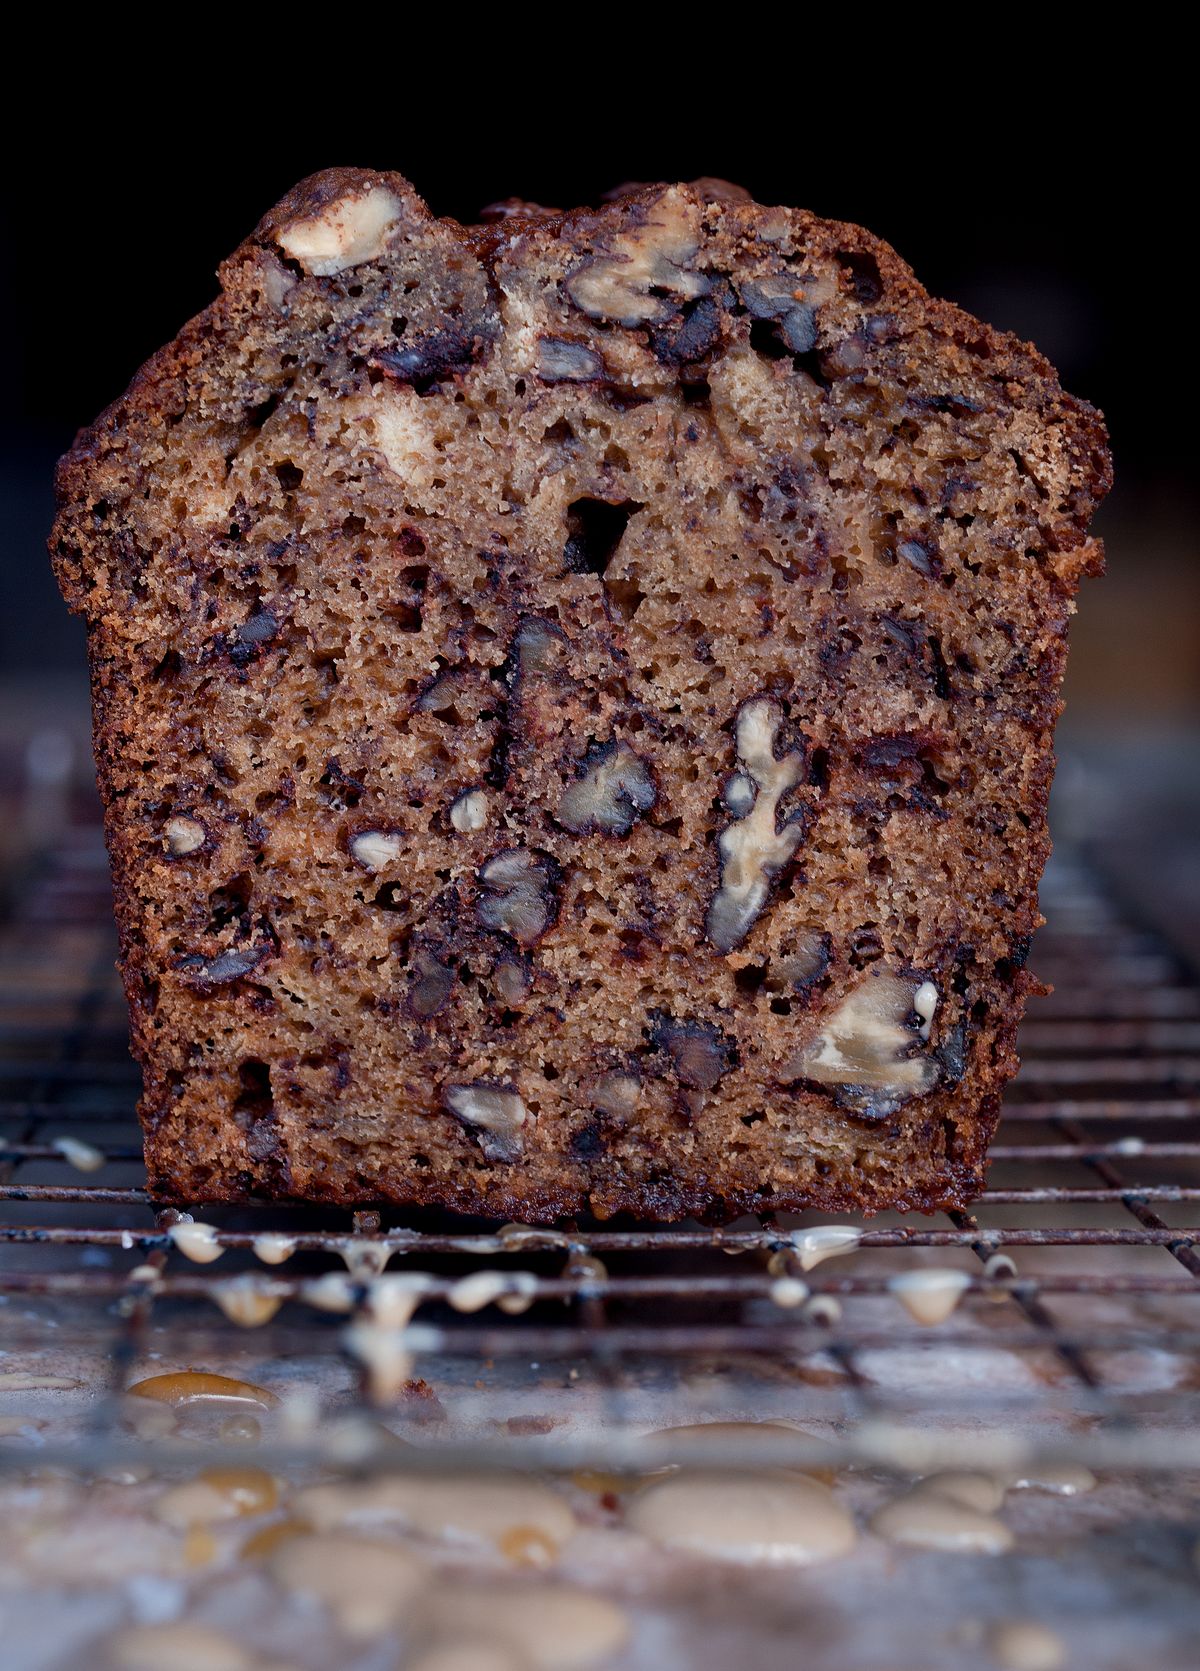 Yotam Ottolenghi’s Grilled Banana Bread with Tahini and Honeycomb